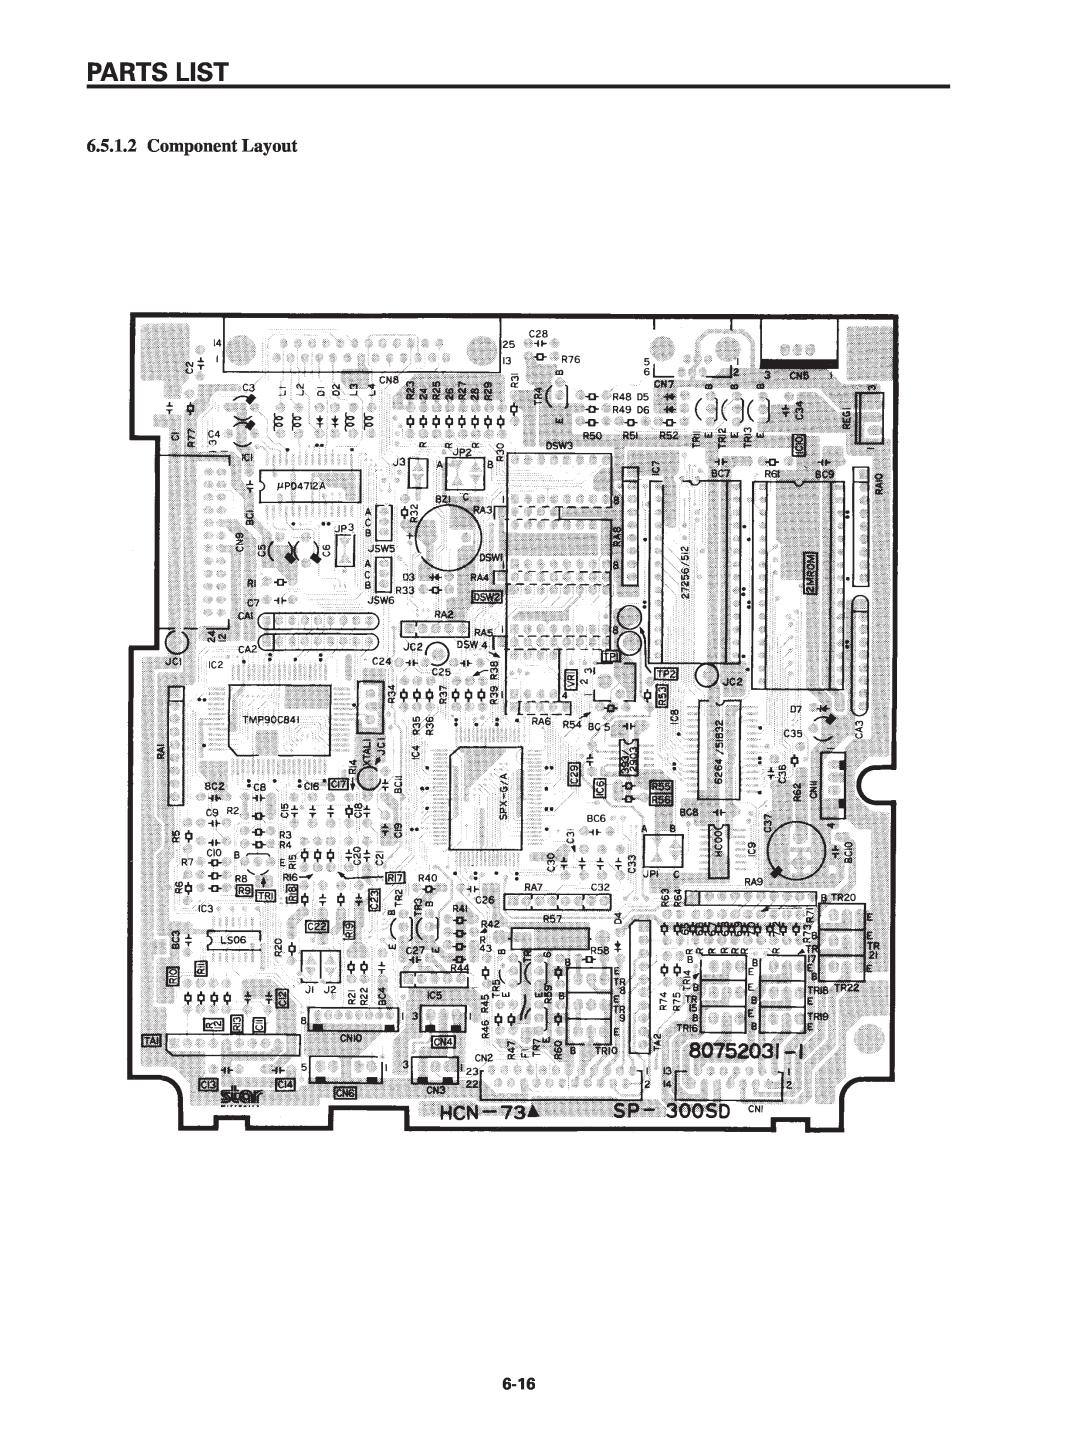 Star Micronics SP320S technical manual Parts List, Component Layout 